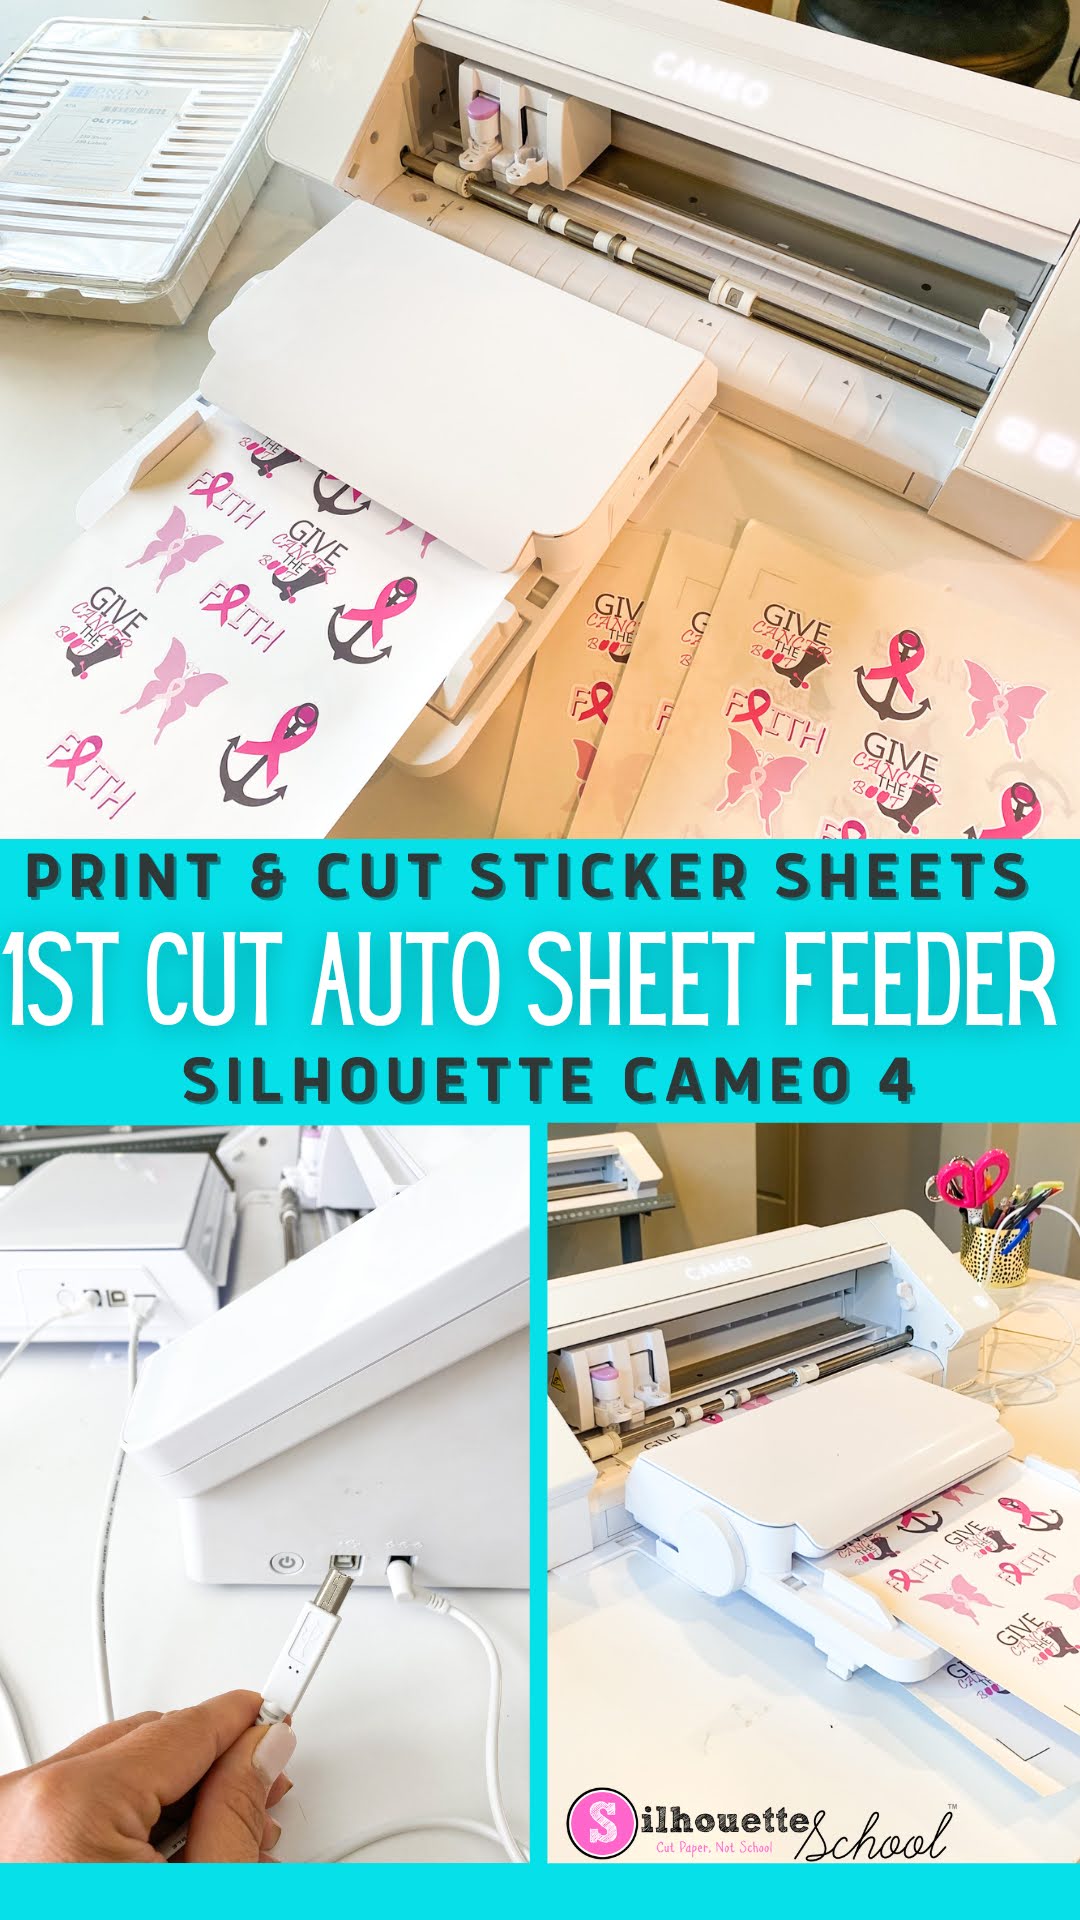 How to Cut with the Silhouette CAMEO 4: A Step by Step Guide